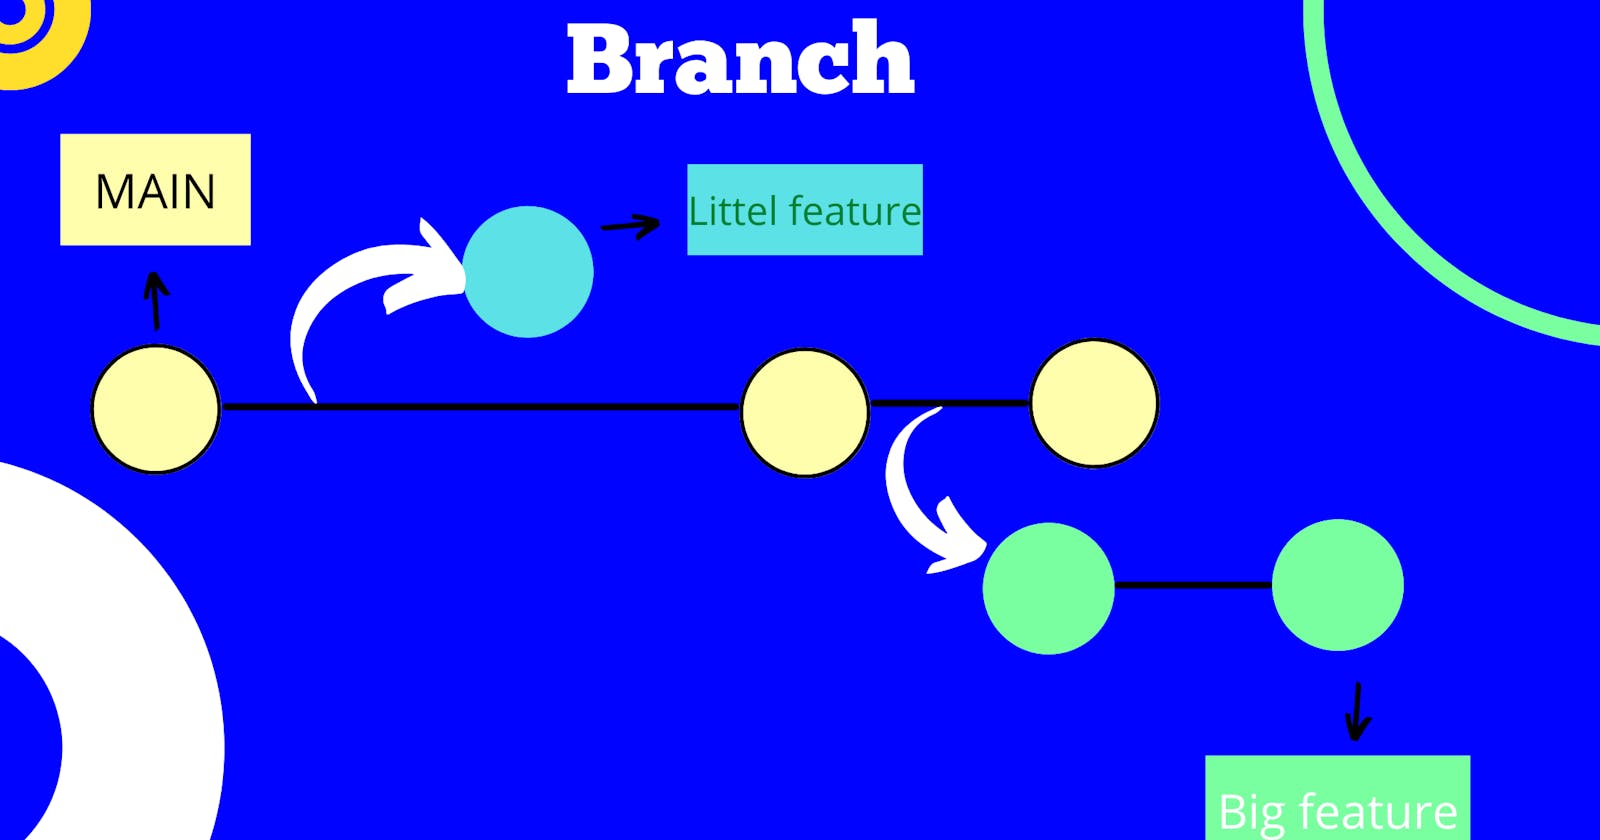 Let's understand Git Branching.